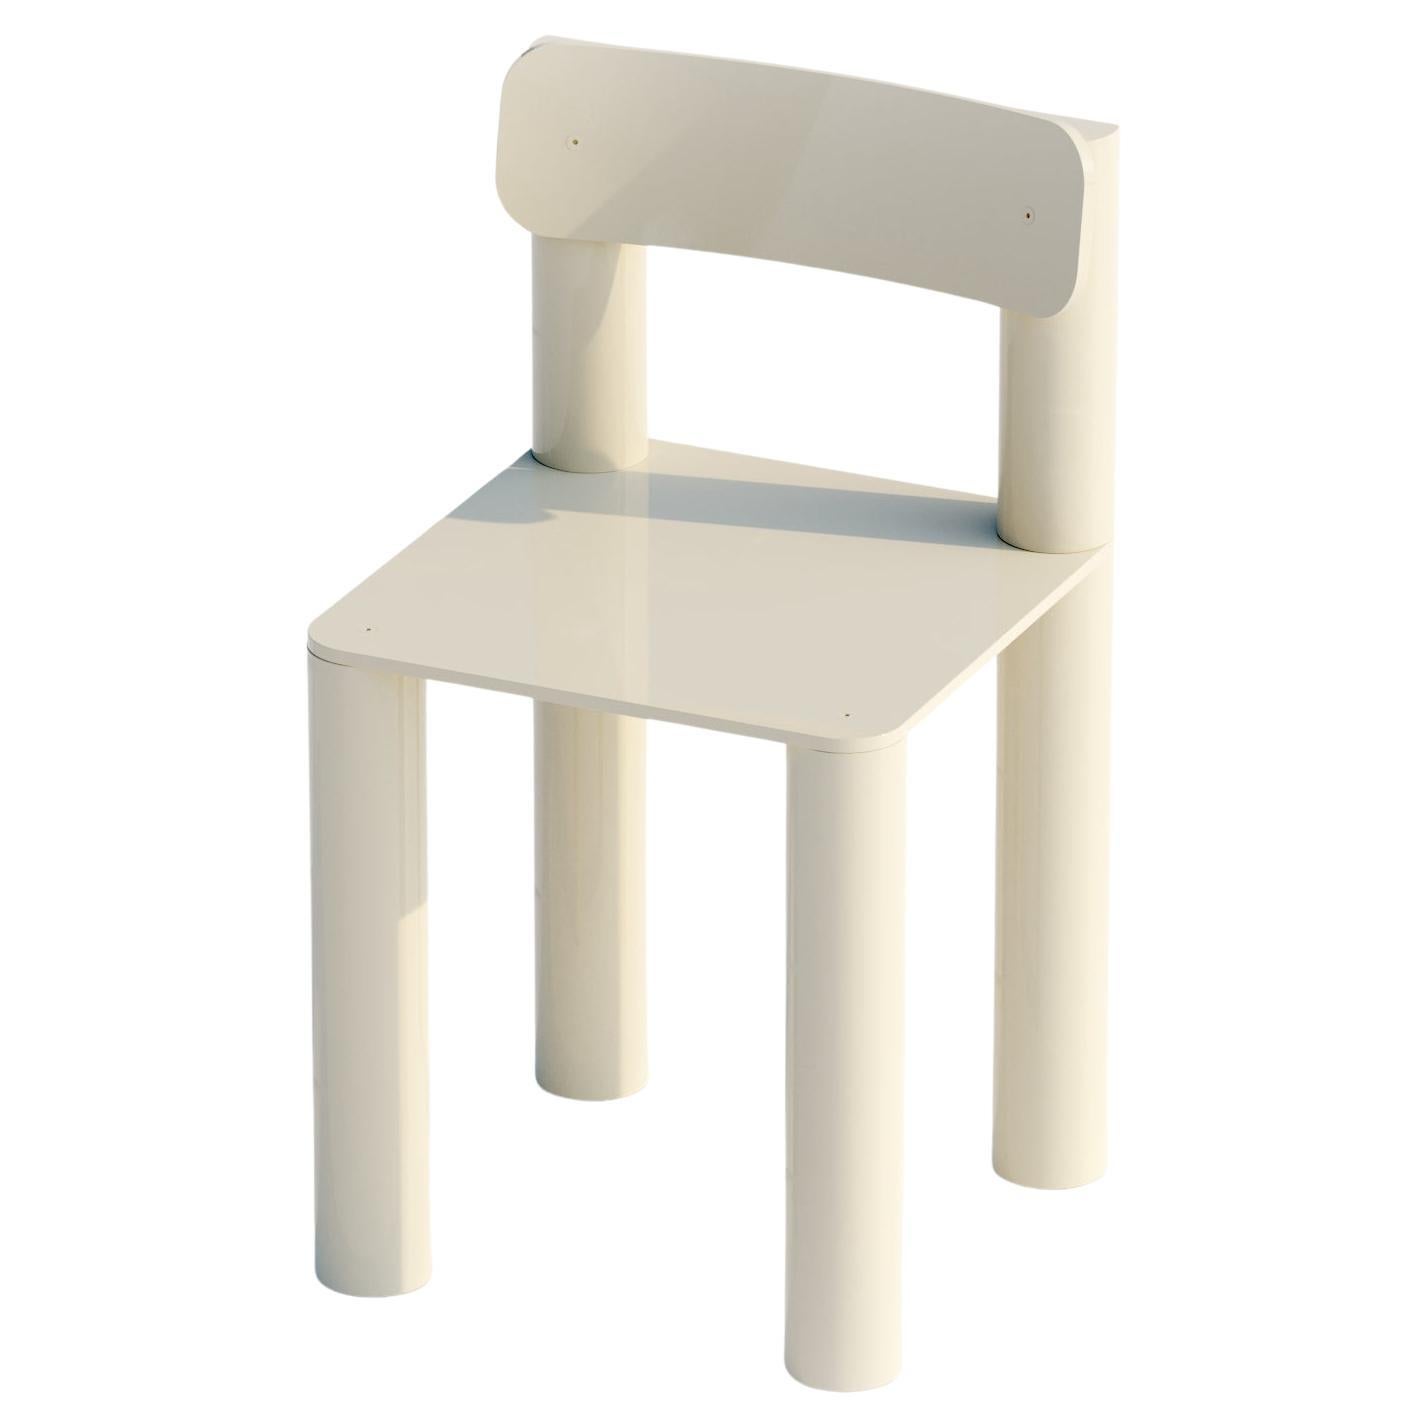 Found - Silo Dinning Chair, Aluminum, Beige For Sale